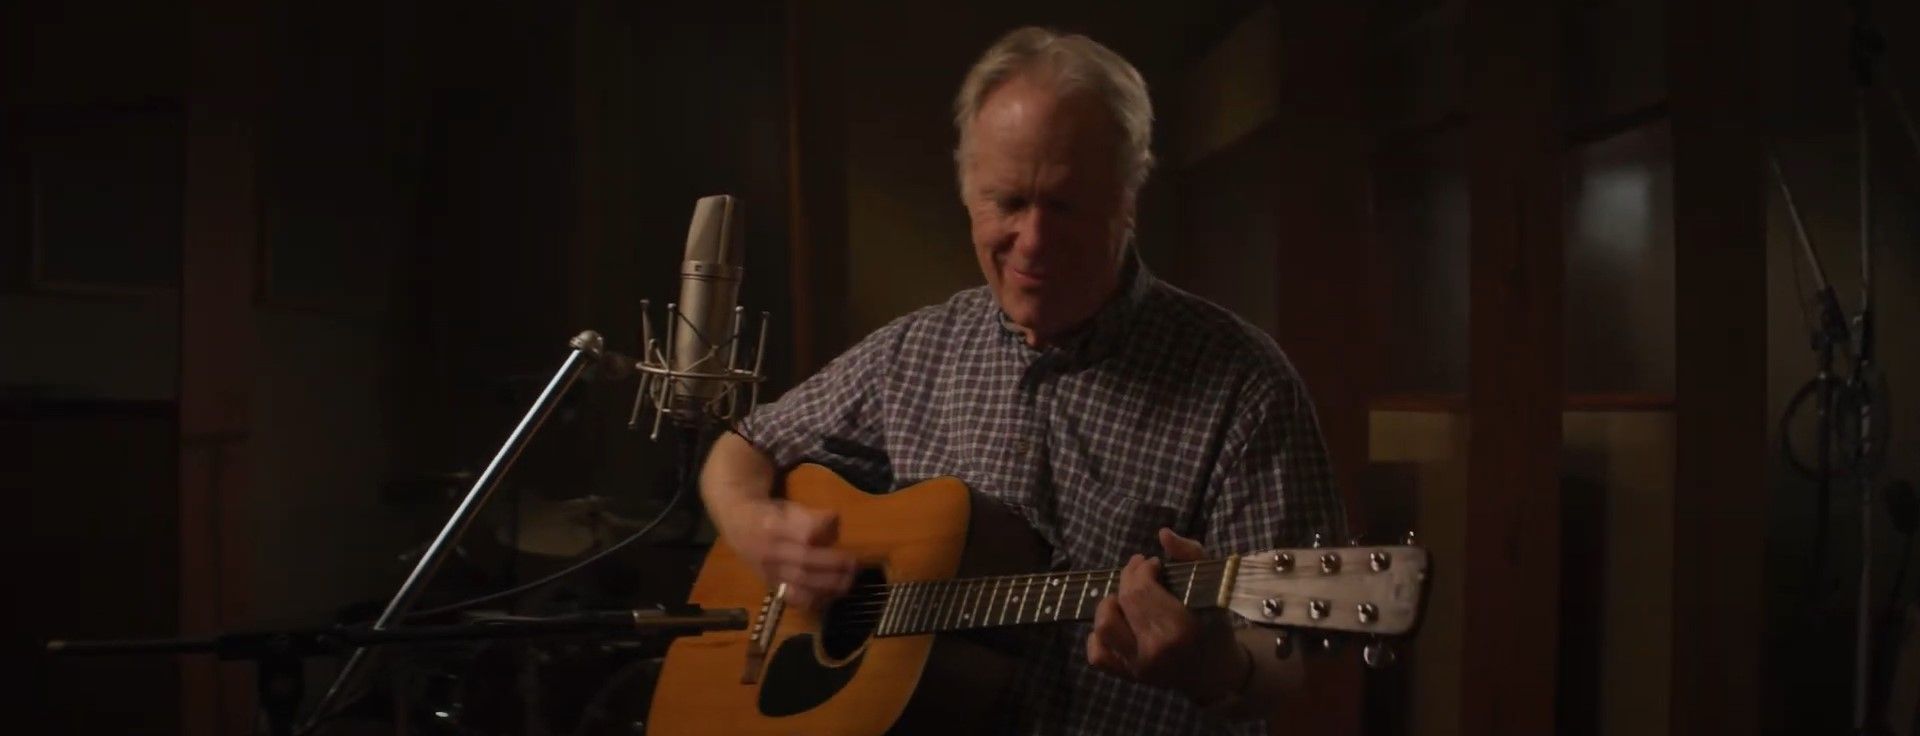 Loudon Wainwright III - Ever Since The World Ended (Official)